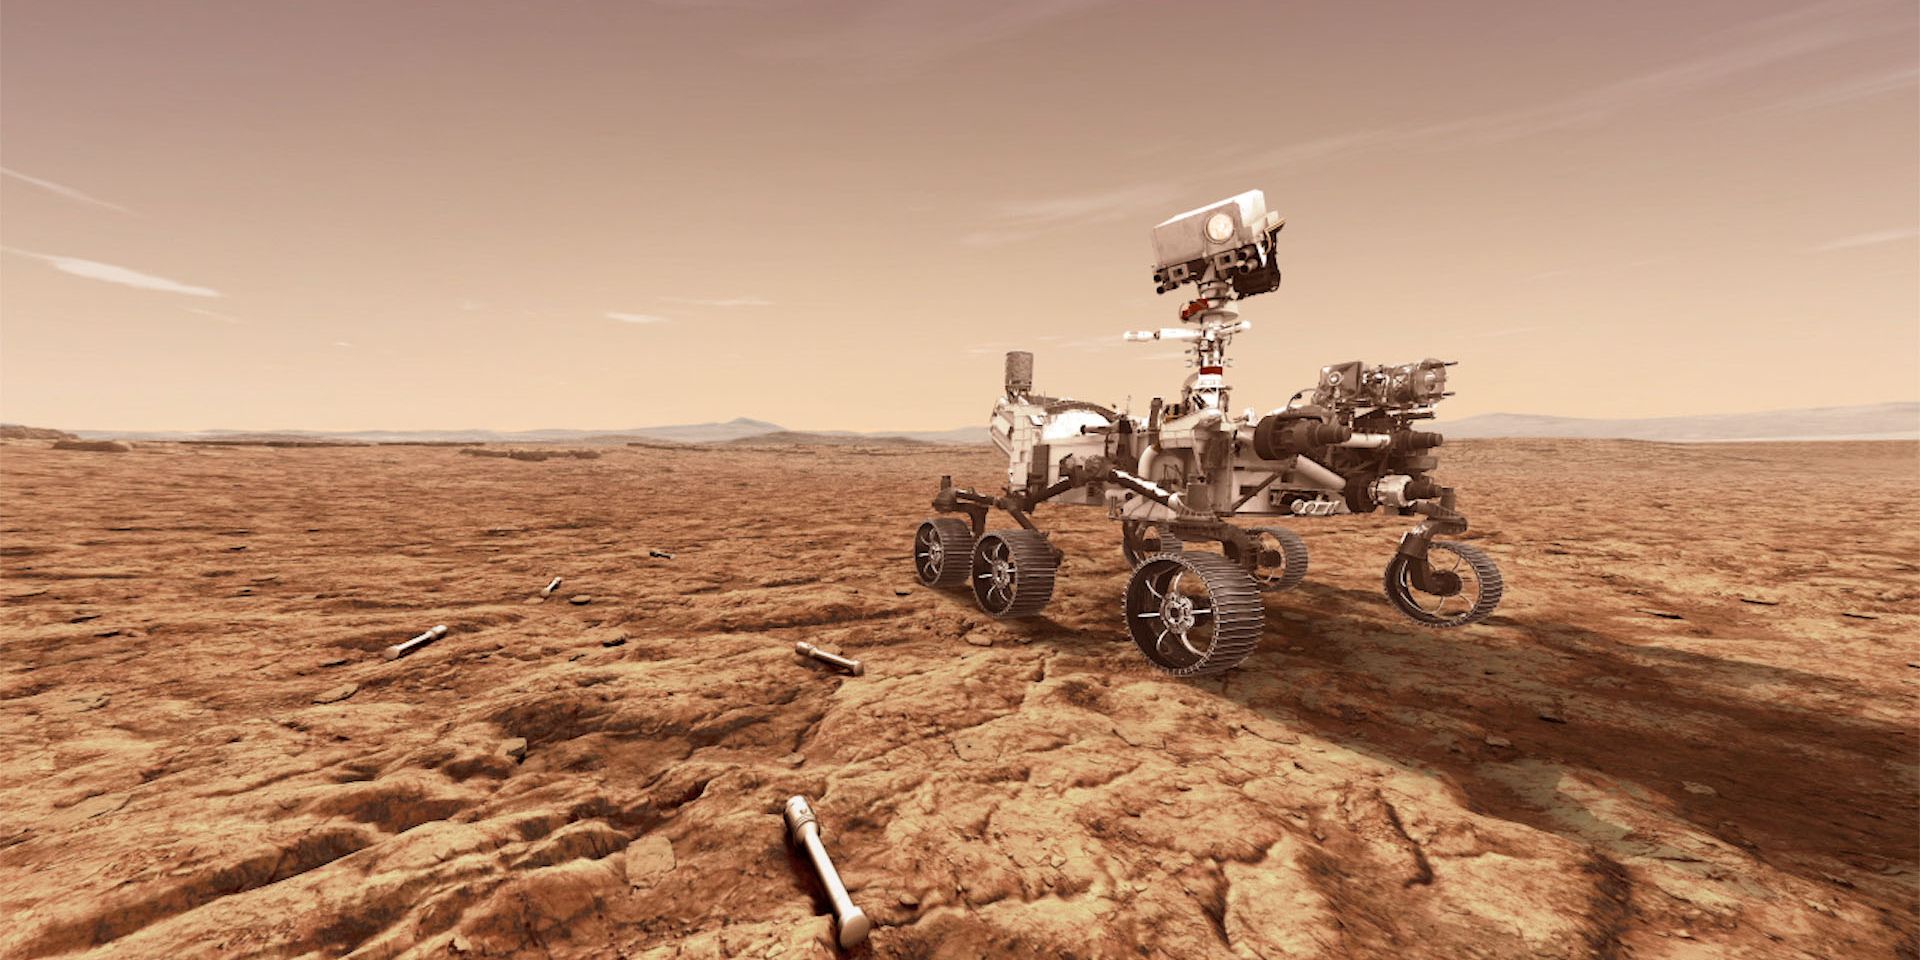 Official illustration of Nasa's Perseverance rover on Mars